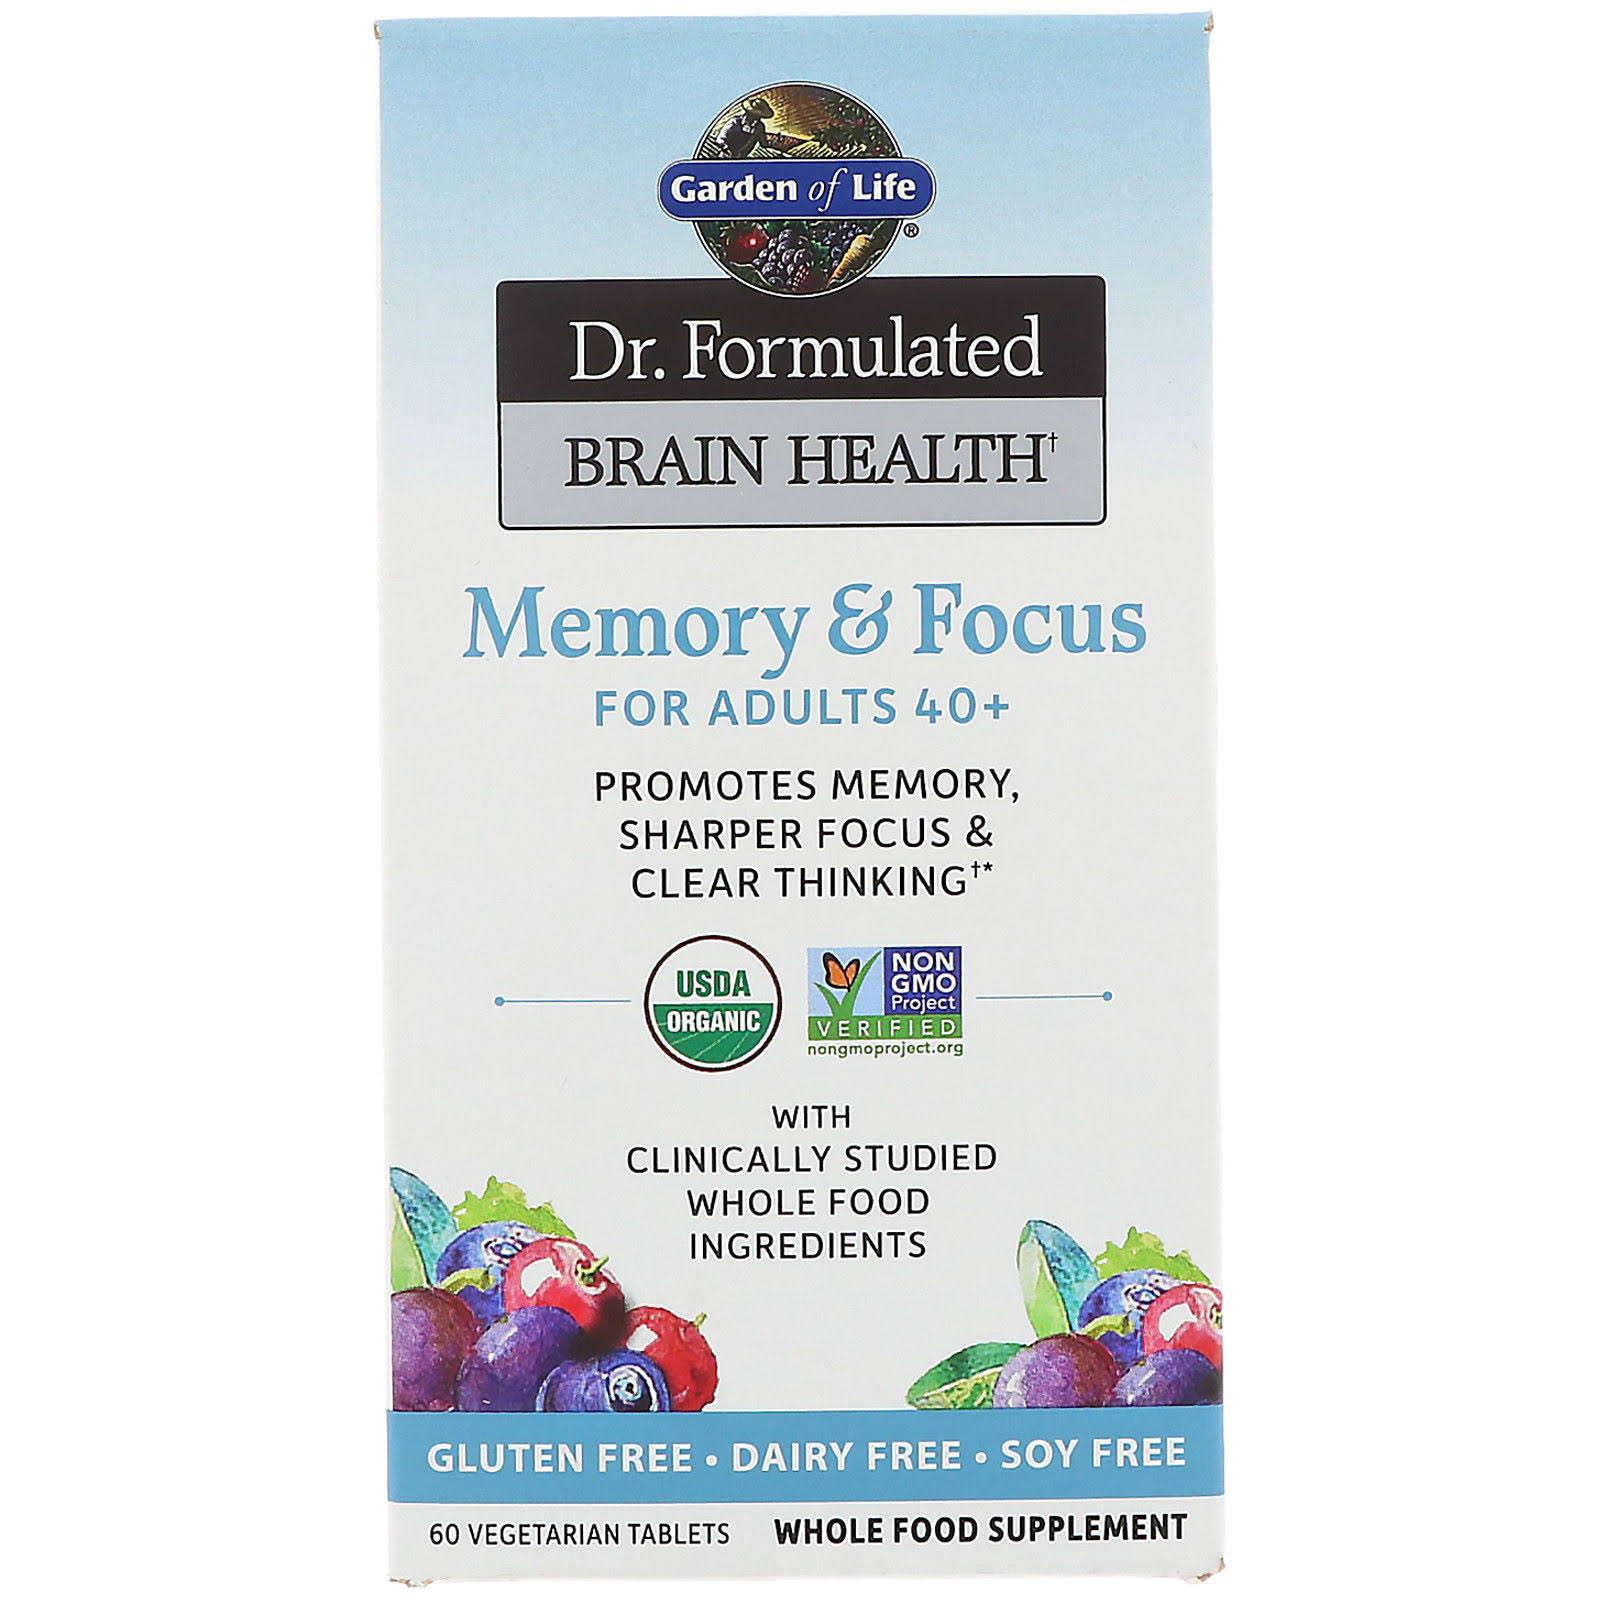 Memory & Focus 40+ - Dr. Formulated Brain Health - 60 Tablets - Garden of Life